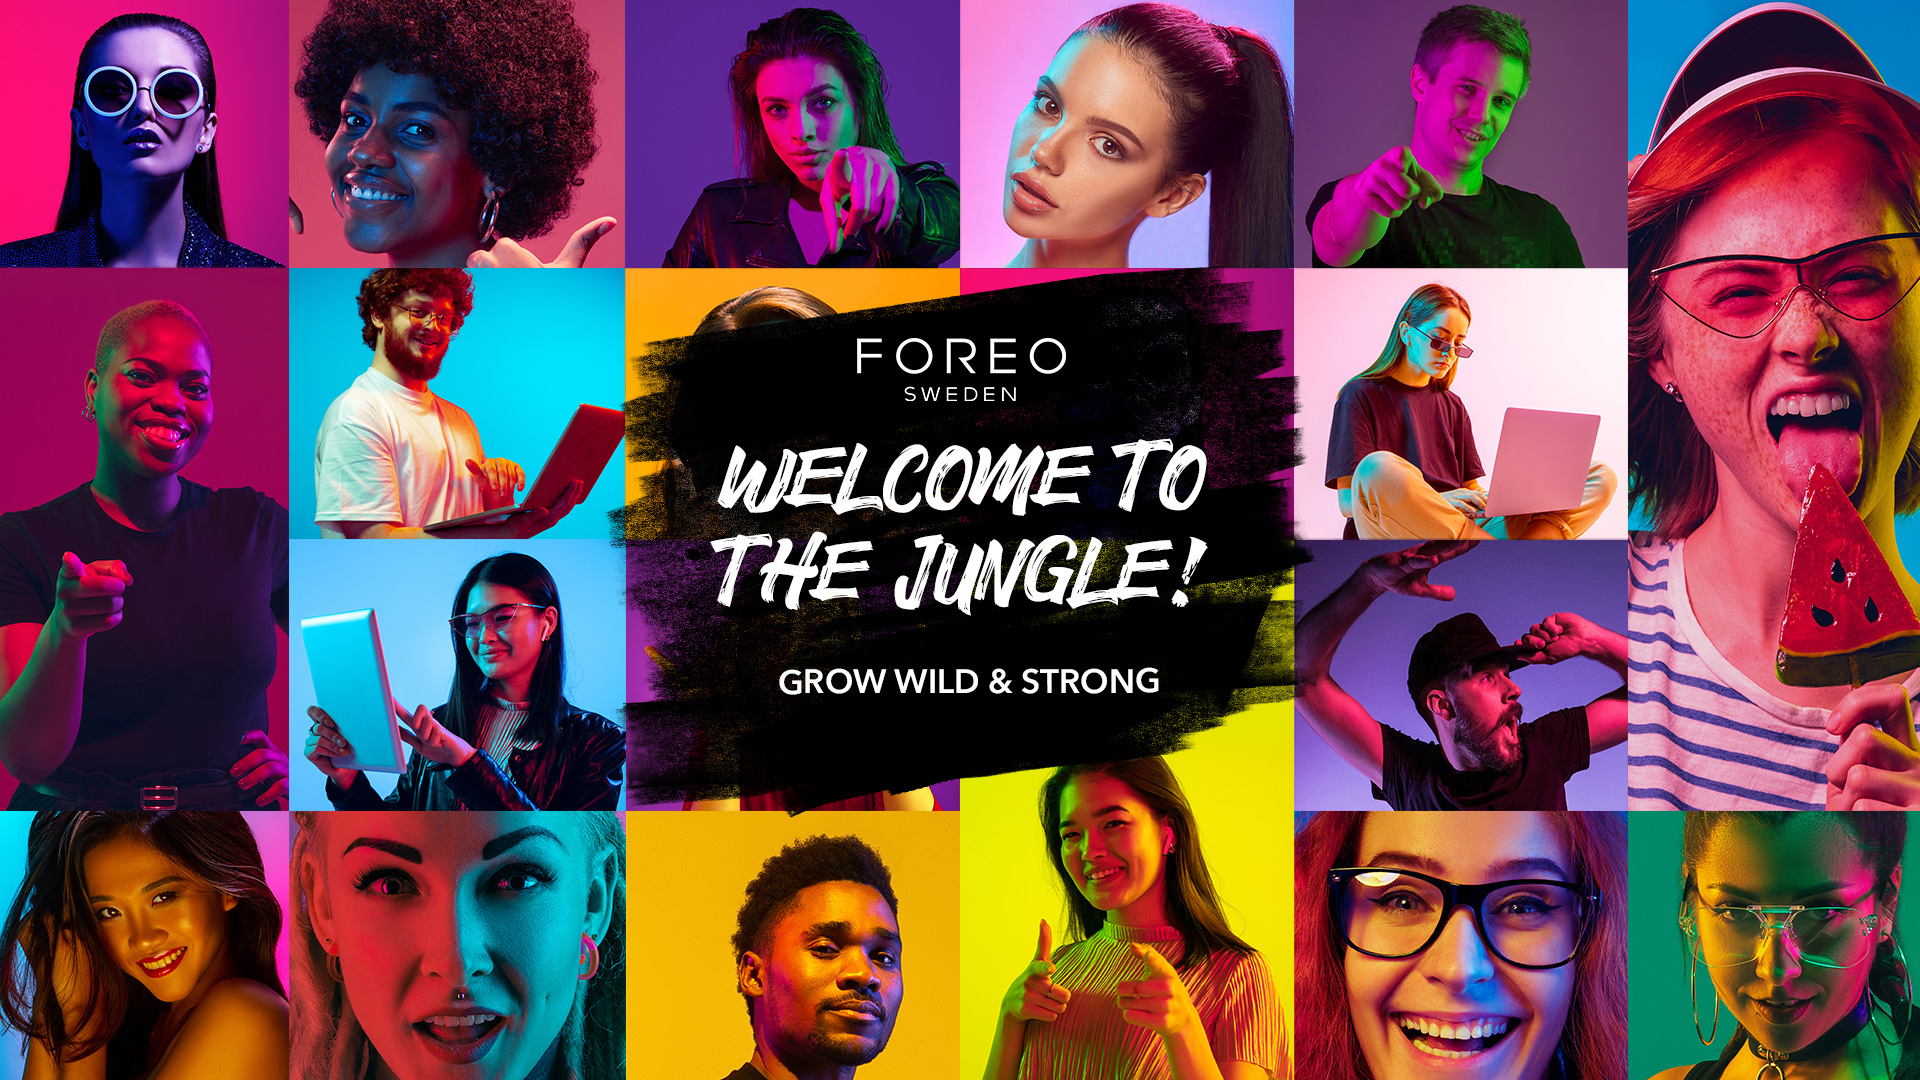 WELCOME TO THE JUNGLE FOREO